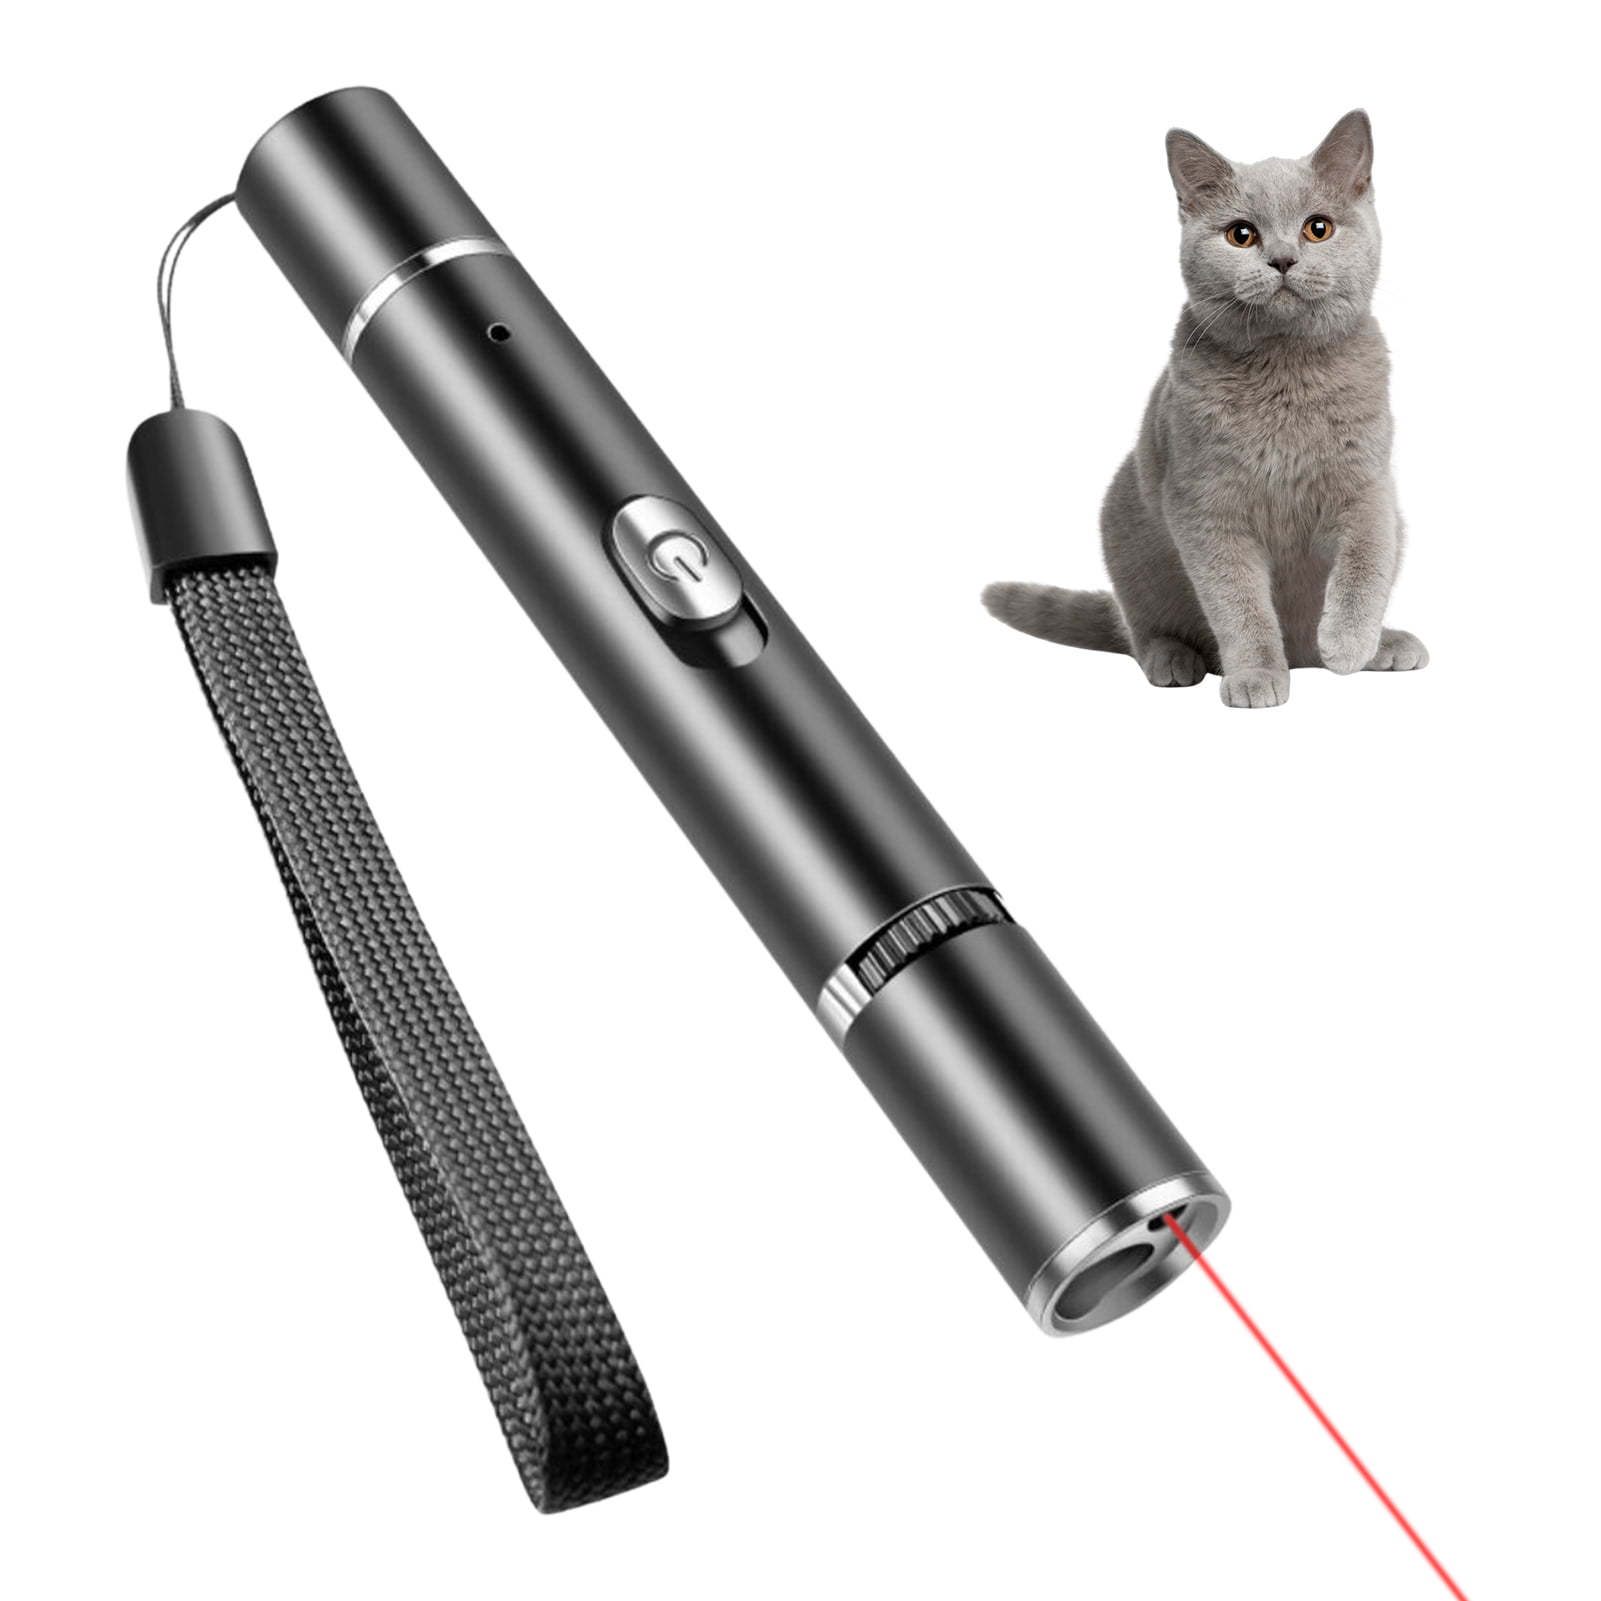 Pet Funny Cat Toy Multi-pattern LED Light Laser Pointer Pen USB Chargeable Gift 